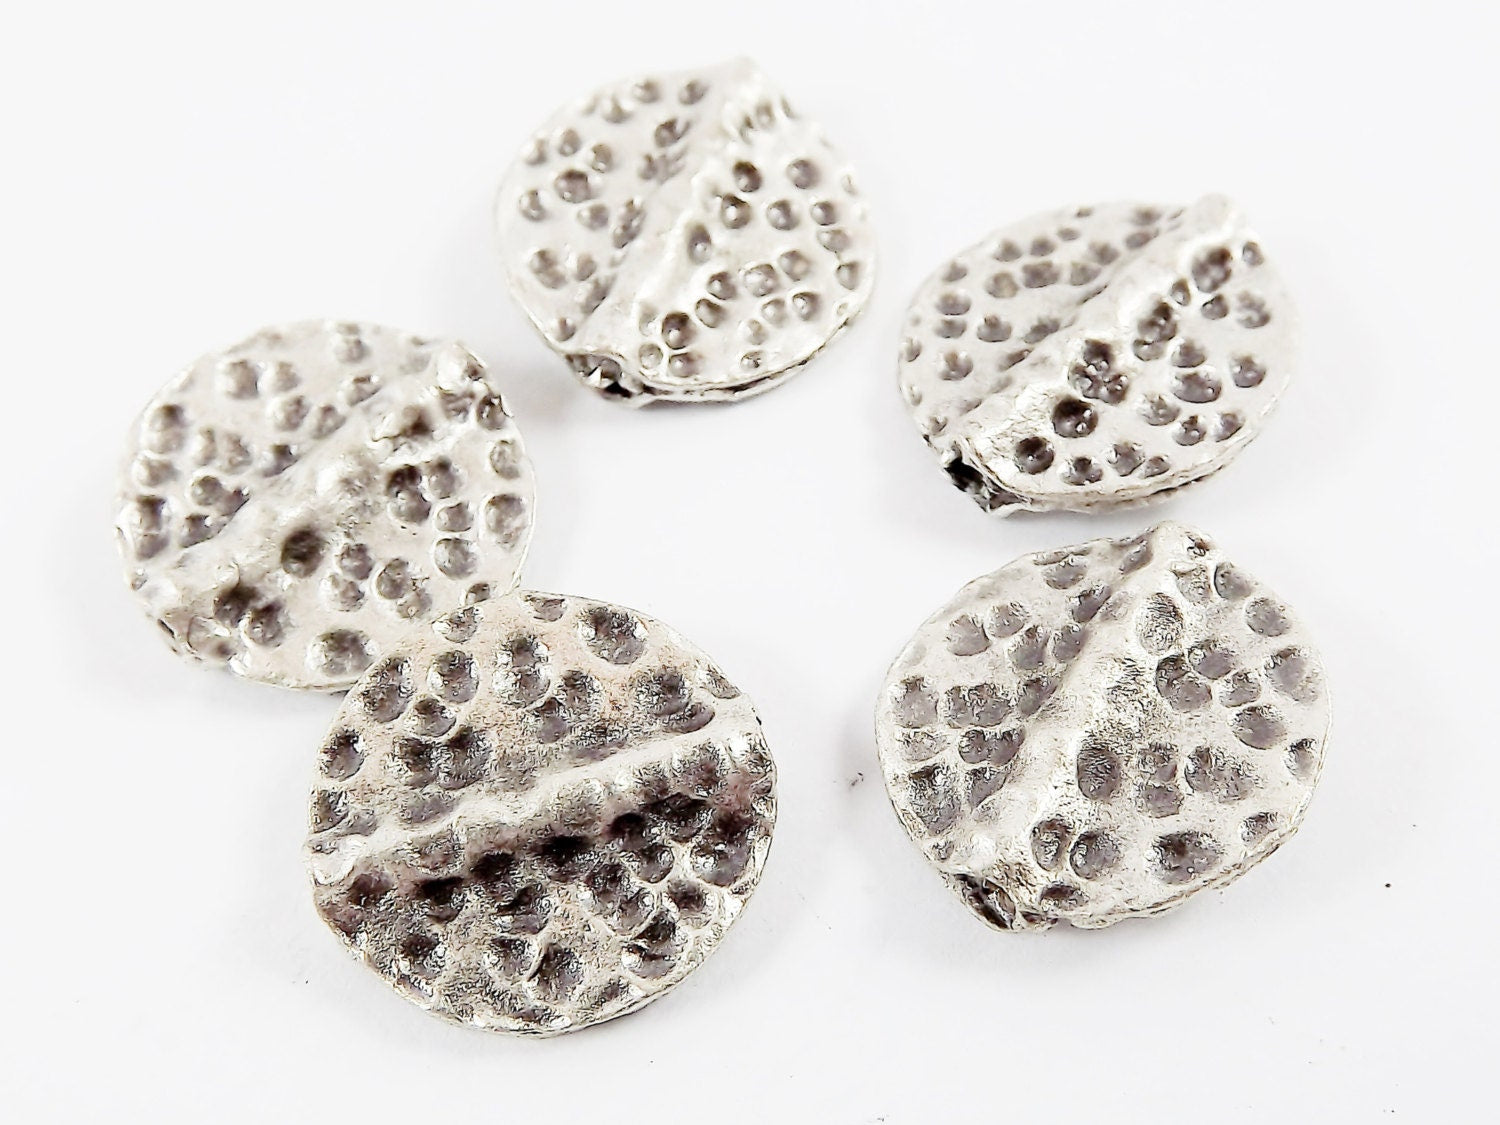 5 Small Hammered Round Disc Statement Spacer Bead Pendants - Matte Antique Silver Plated